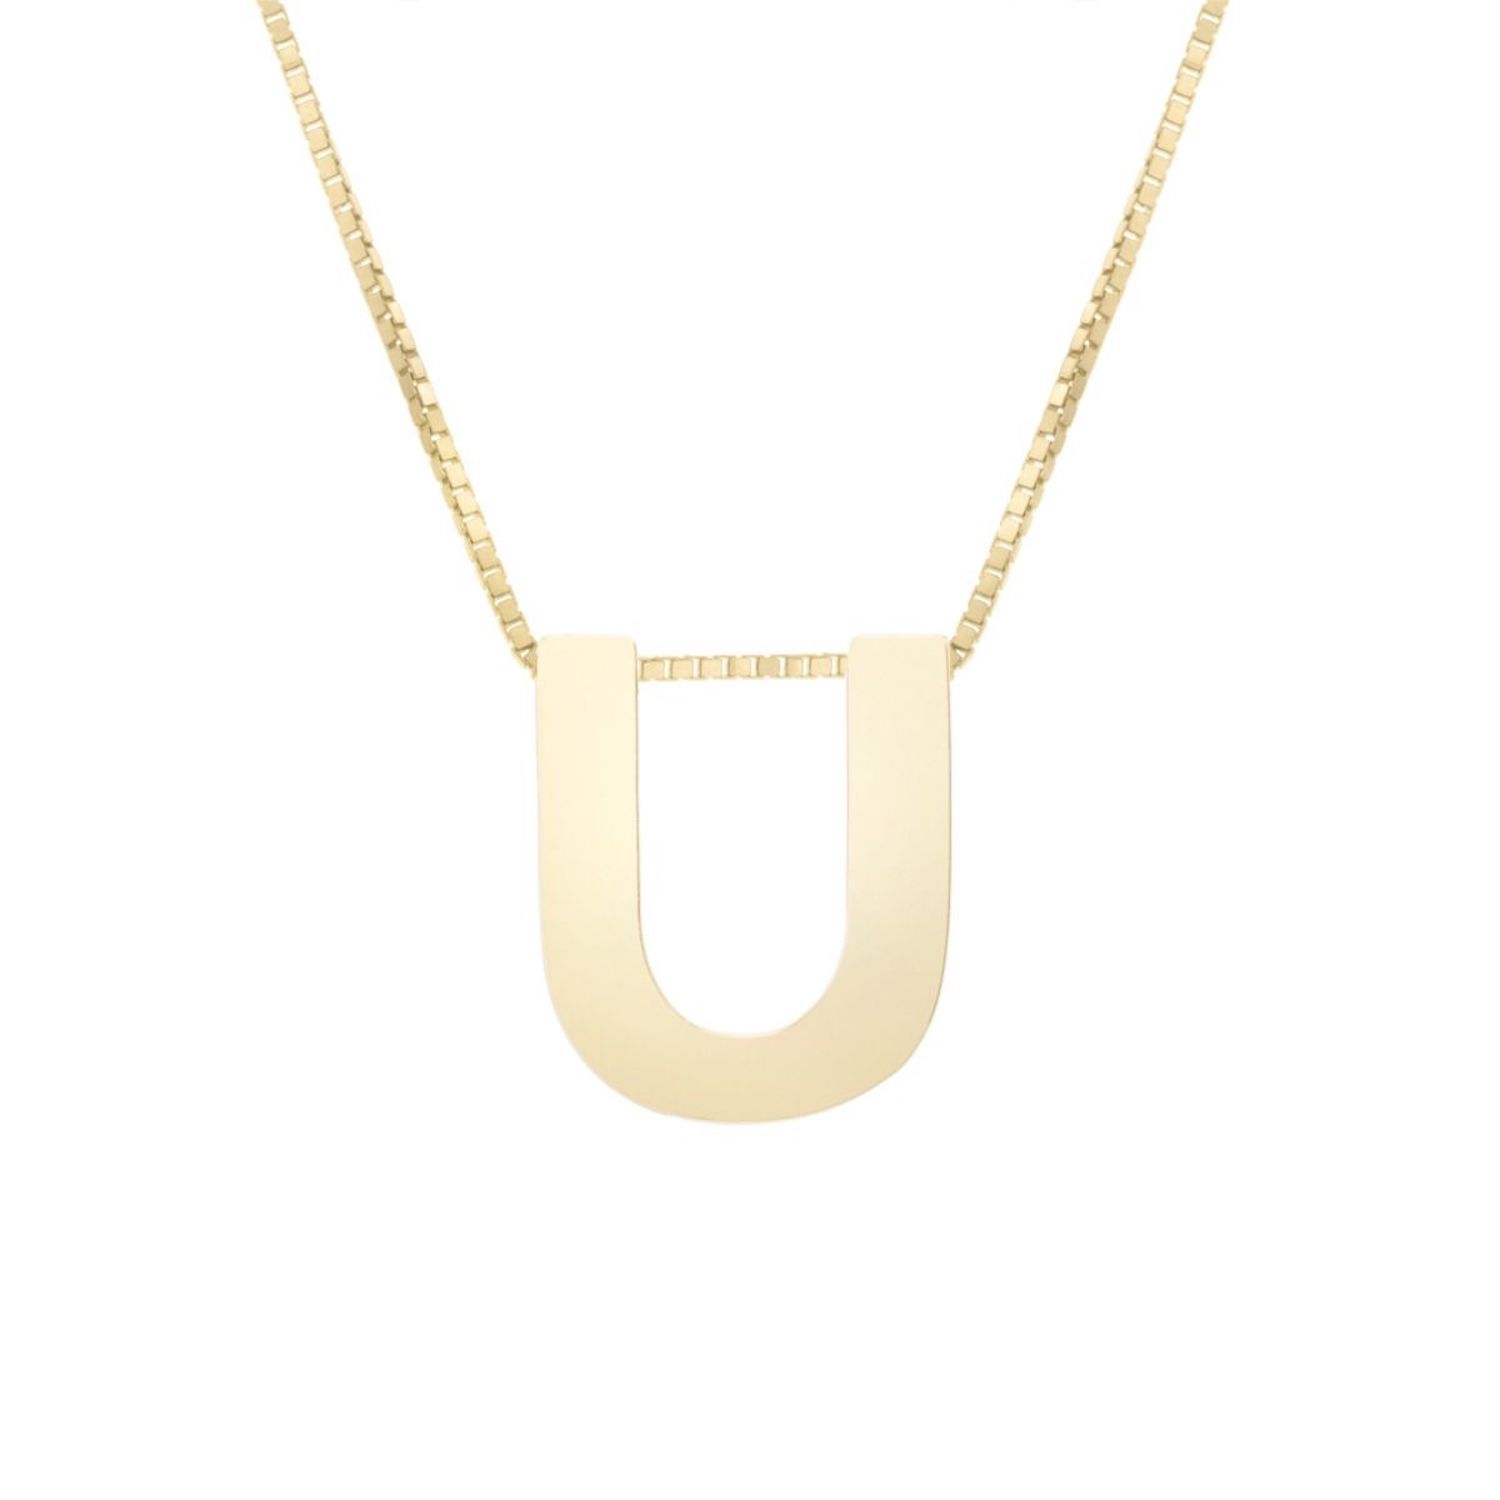 14K Yellow Gold Block Letter Initial Pendant Box Chain Necklace 16"-18" - U